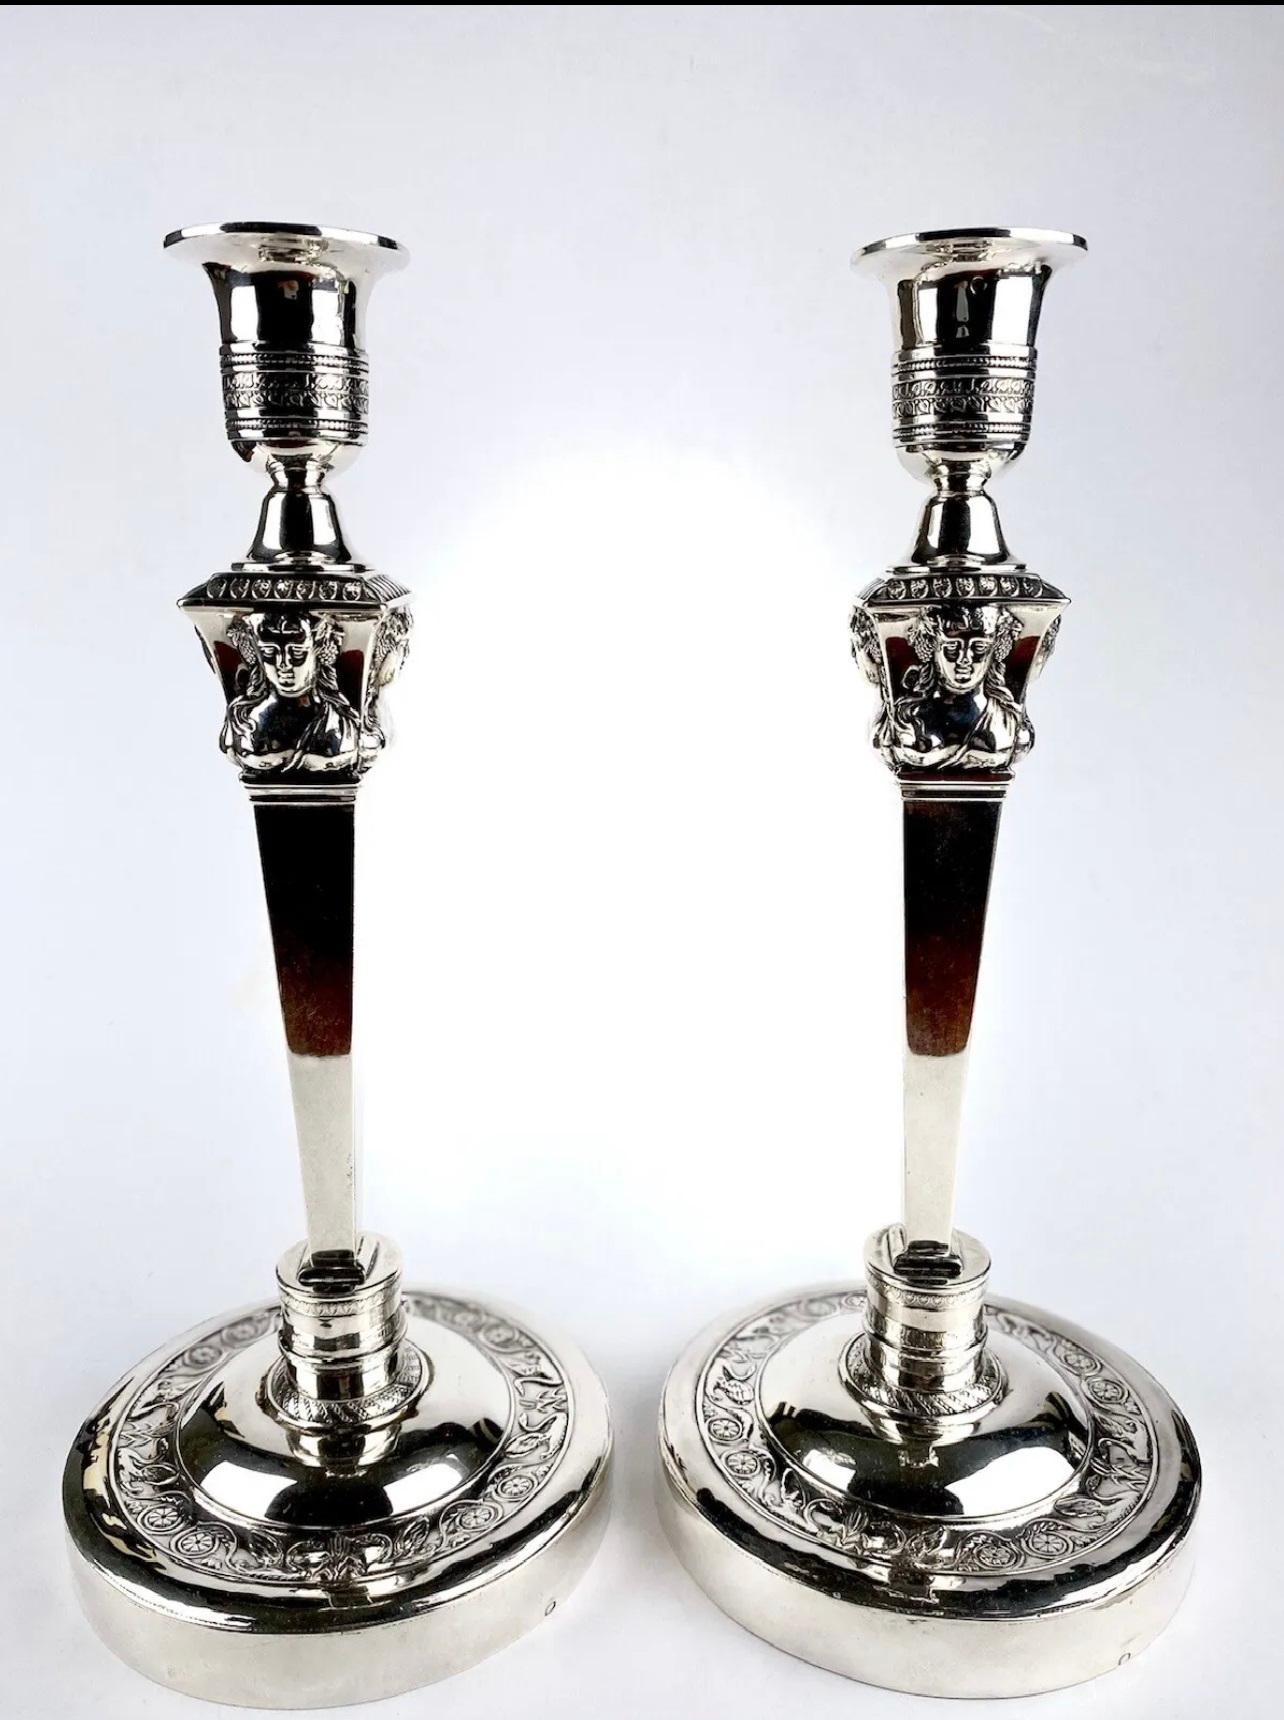 A Magnificent Solid Silver Pair of Georgian Candlesticks.

PLEASE NOTE: These are not weighted to base, the weight is in Sterling Silver.

Dating from the first years when France became a Republic.

The Pair are decorated on all sides by a Maiden